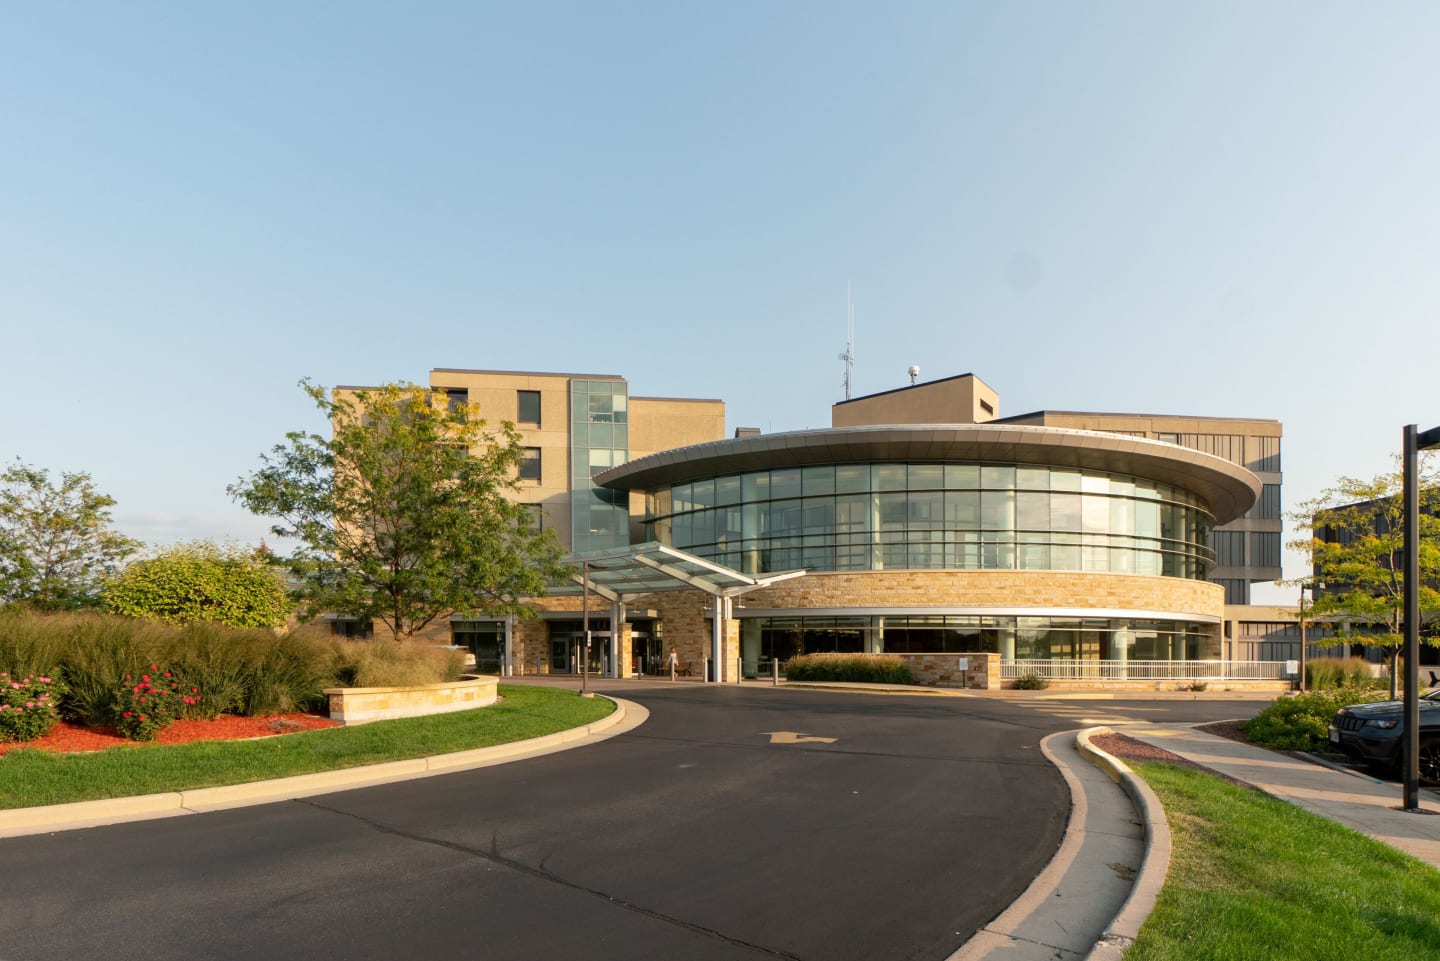 The rounded glass and sandy-colored exterior of Mercy Regional Heart and Vascular Center